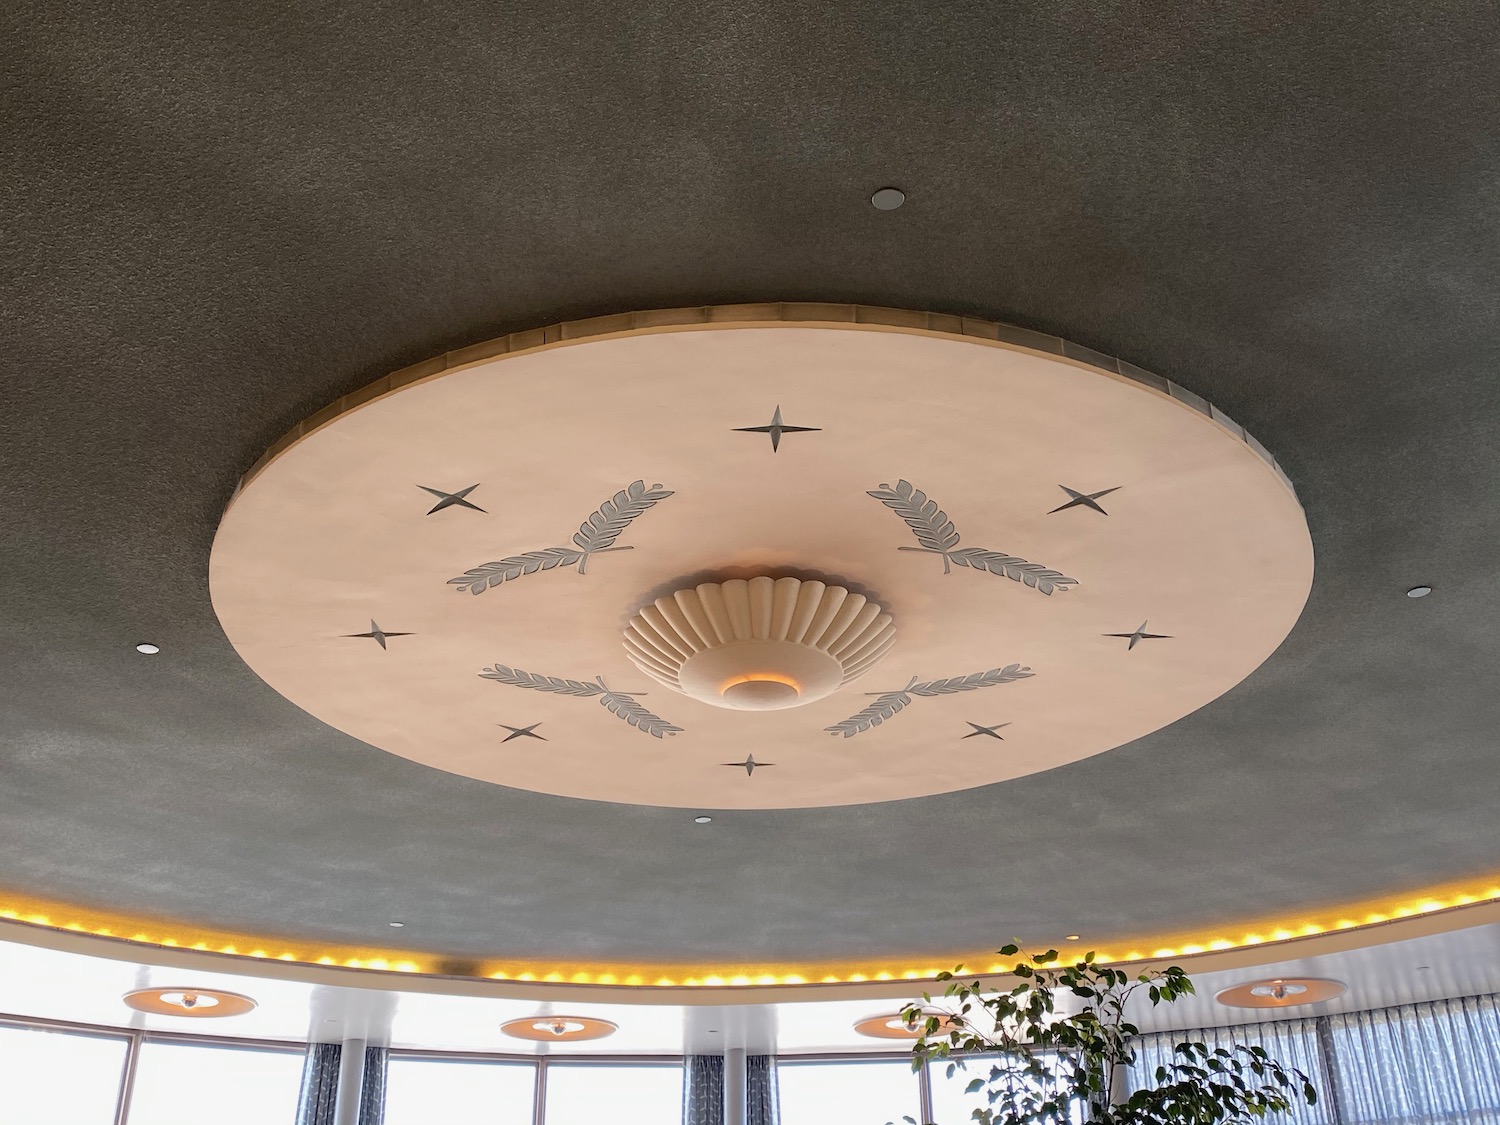 a light fixture on a ceiling